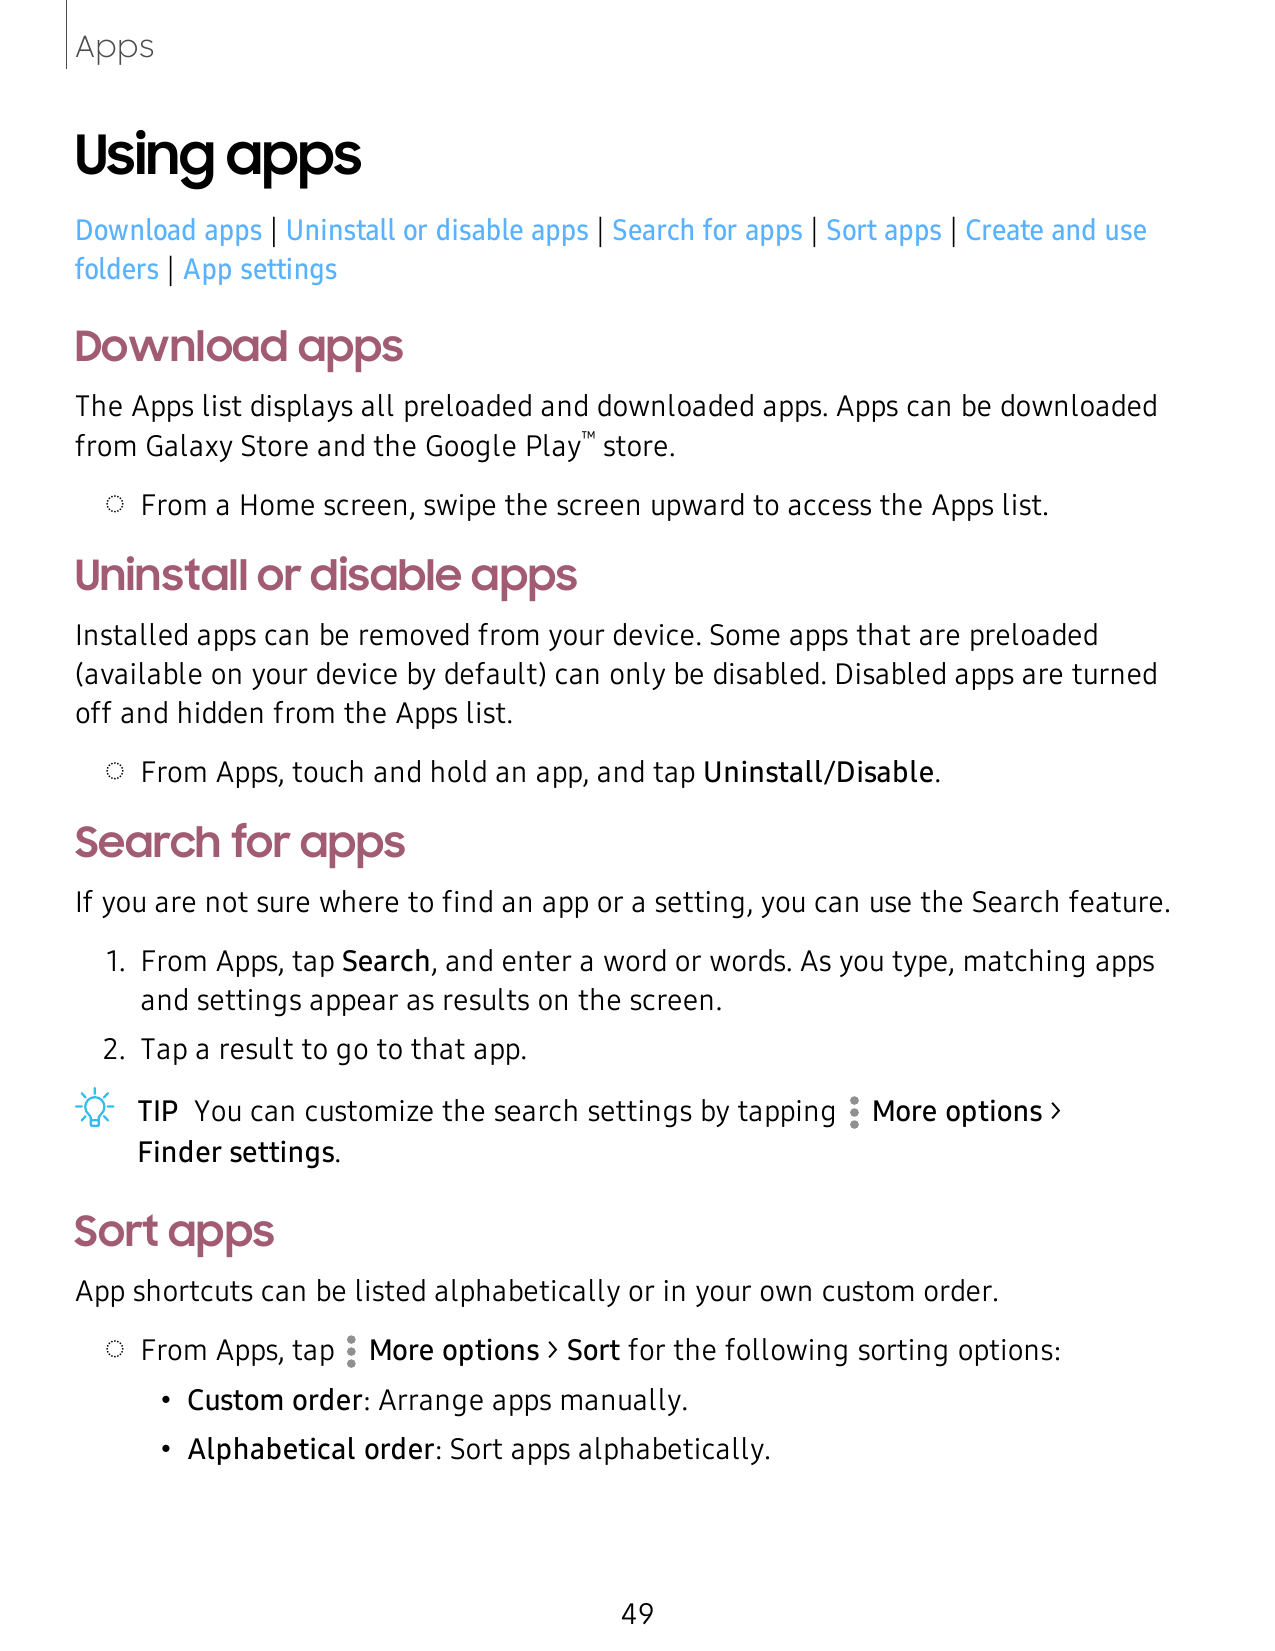 AppsUsing appsDownload apps | Uninstall or disable apps | Search for apps | Sort apps | Create and usefolders | App settingsDown